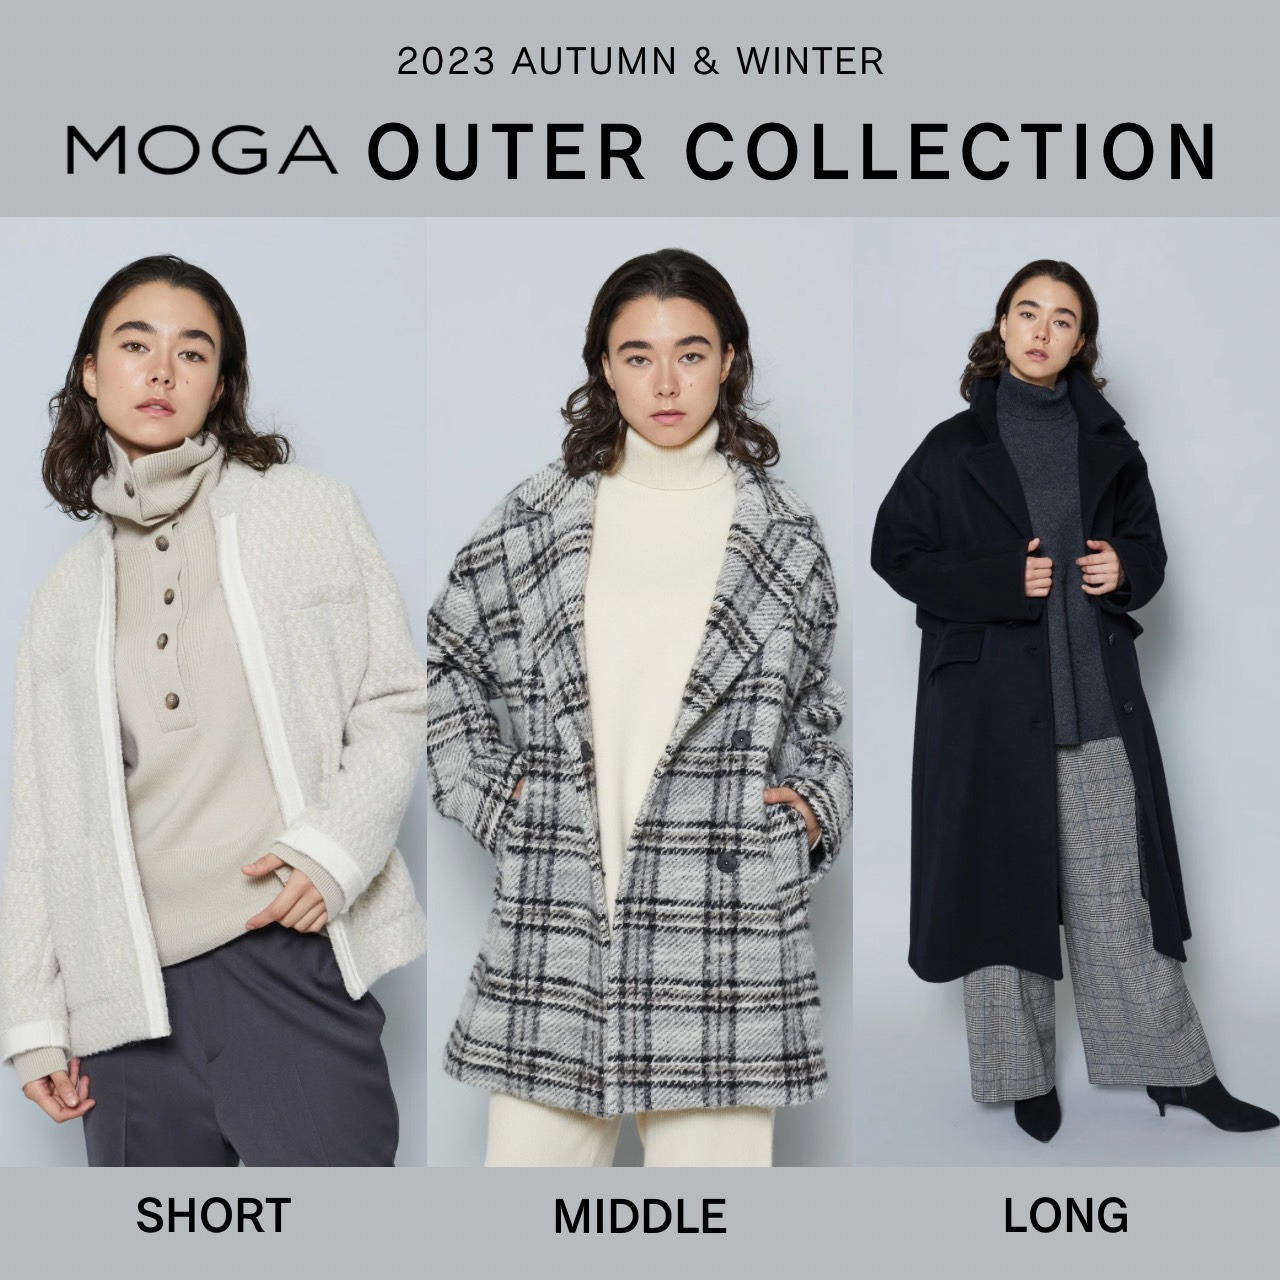 MOGA OUTER COLLECTION